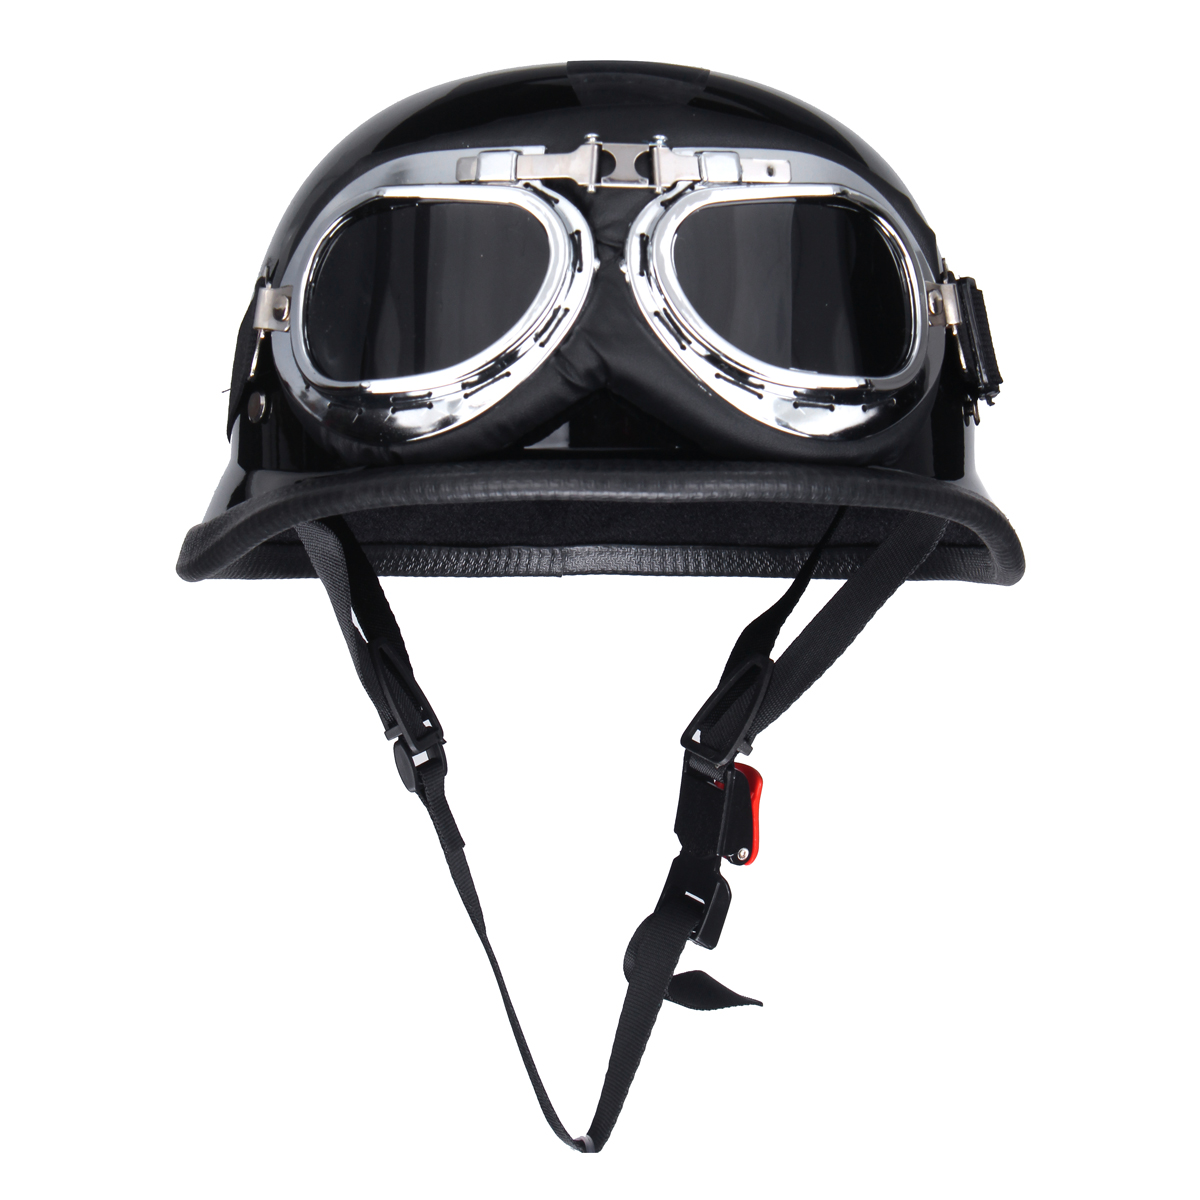 Retro Vintage Motorcycle Bike Riding Half Face Breathable Helmet with Goggles